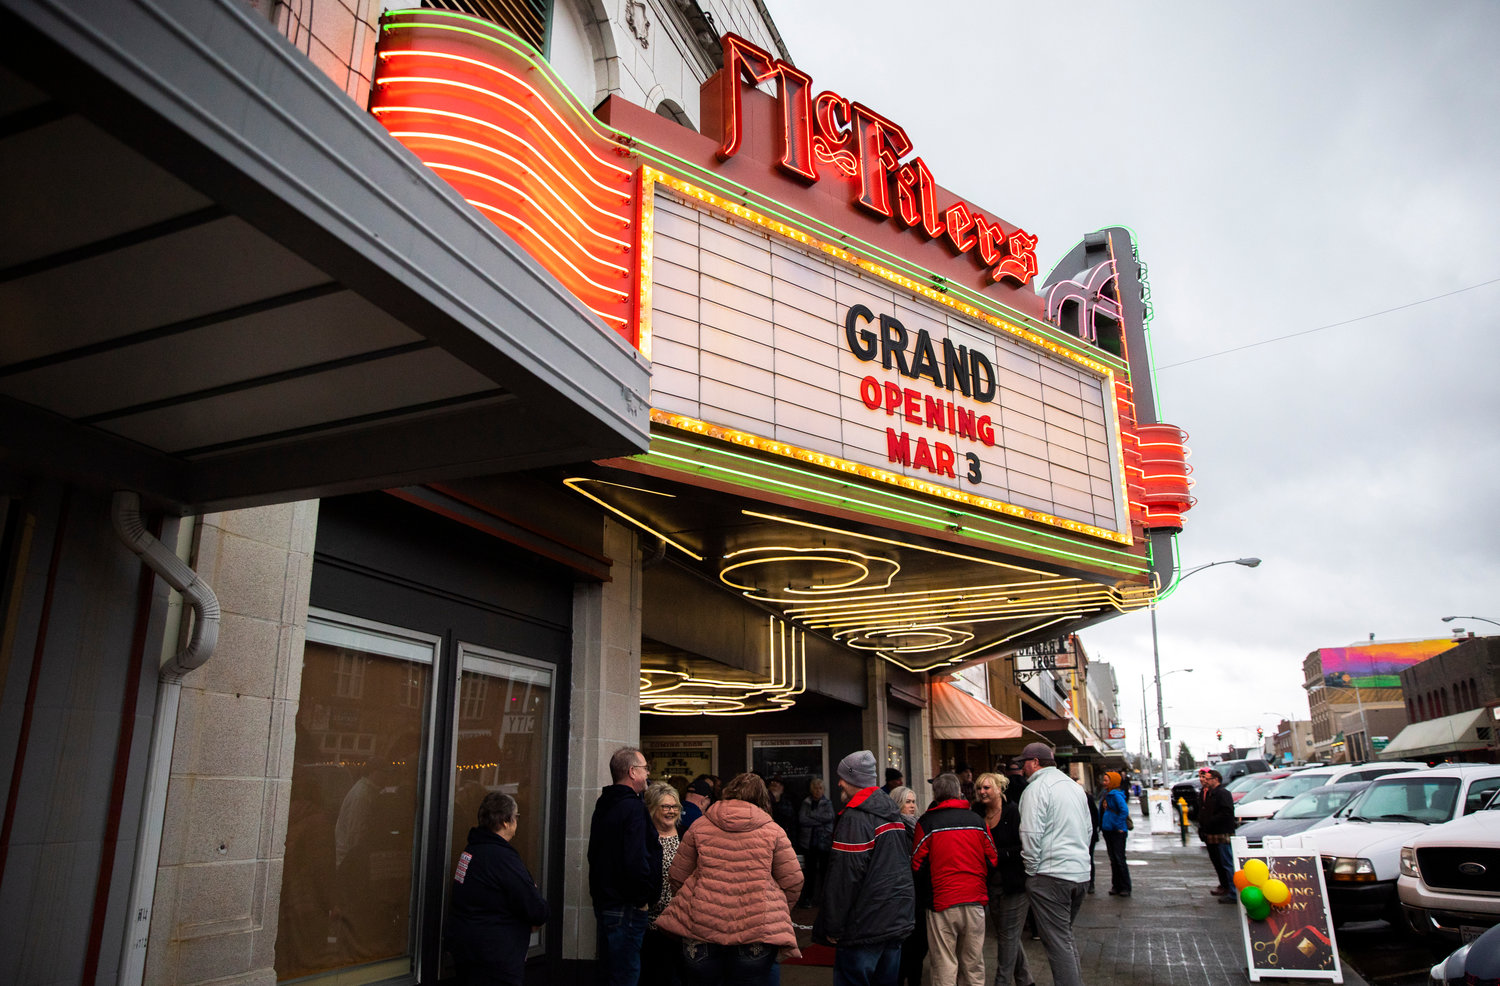 Crowds gather outside McFiler’s Chehalis Theater on Friday for a ribbon cutting ceremony.